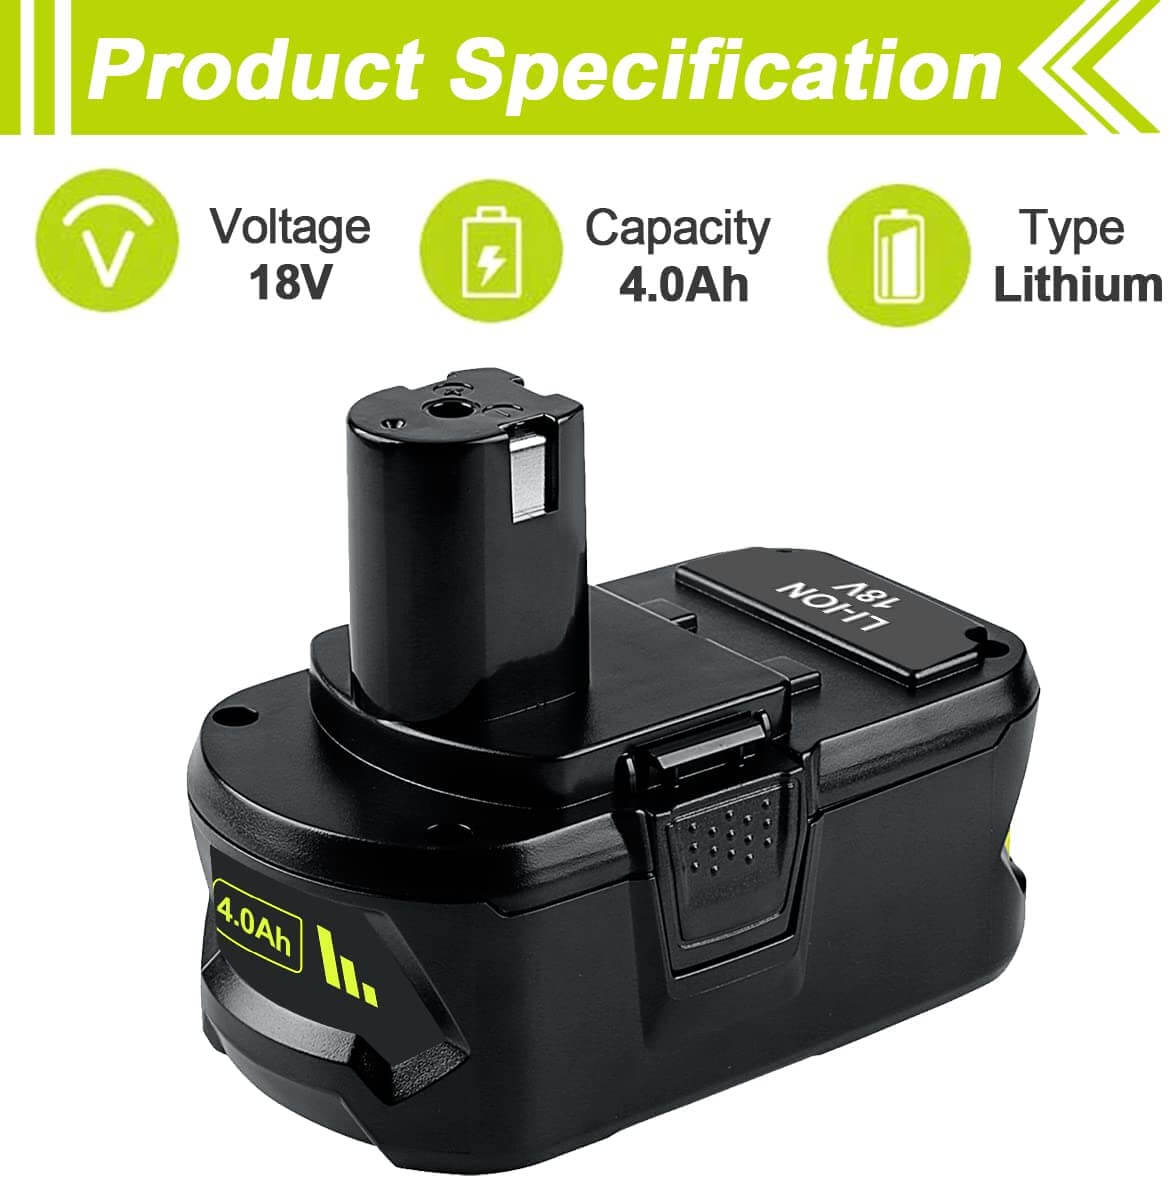 For P108 Ryobi 18V Lithium Battery Replacement | P120 4.0Ah Battery 3 Pack